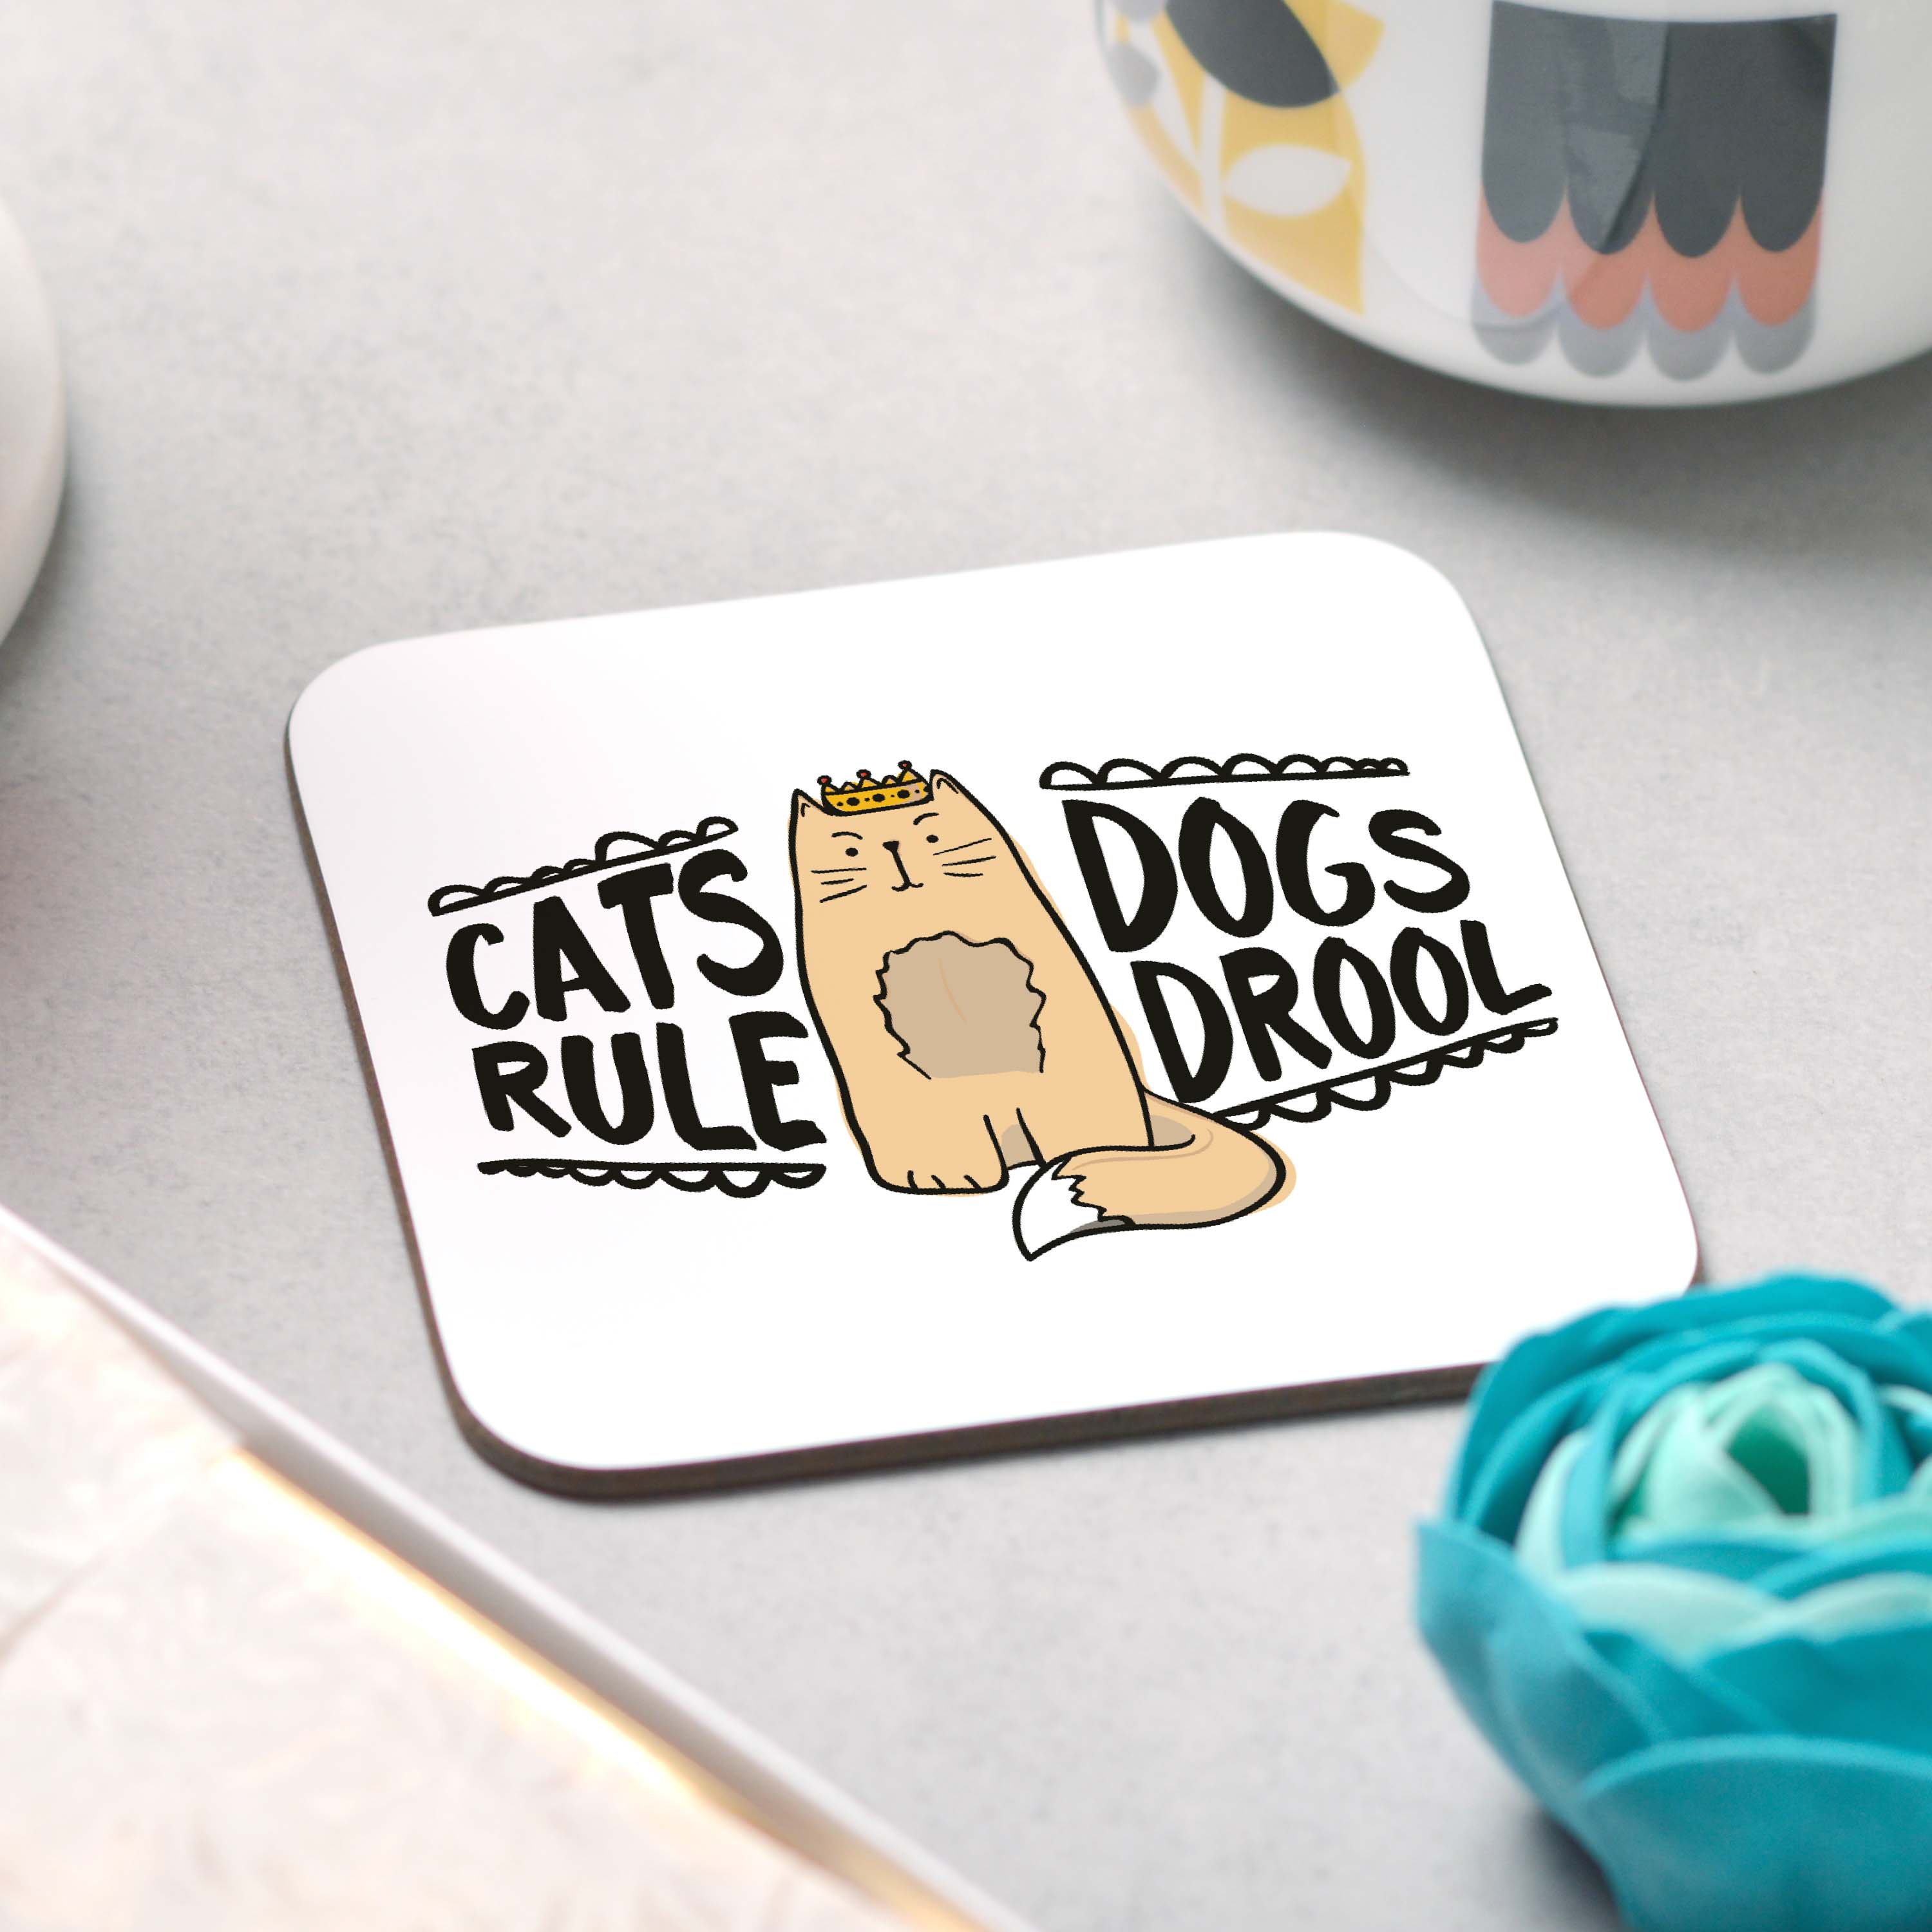 Cats Rule Dogs Drool Coaster